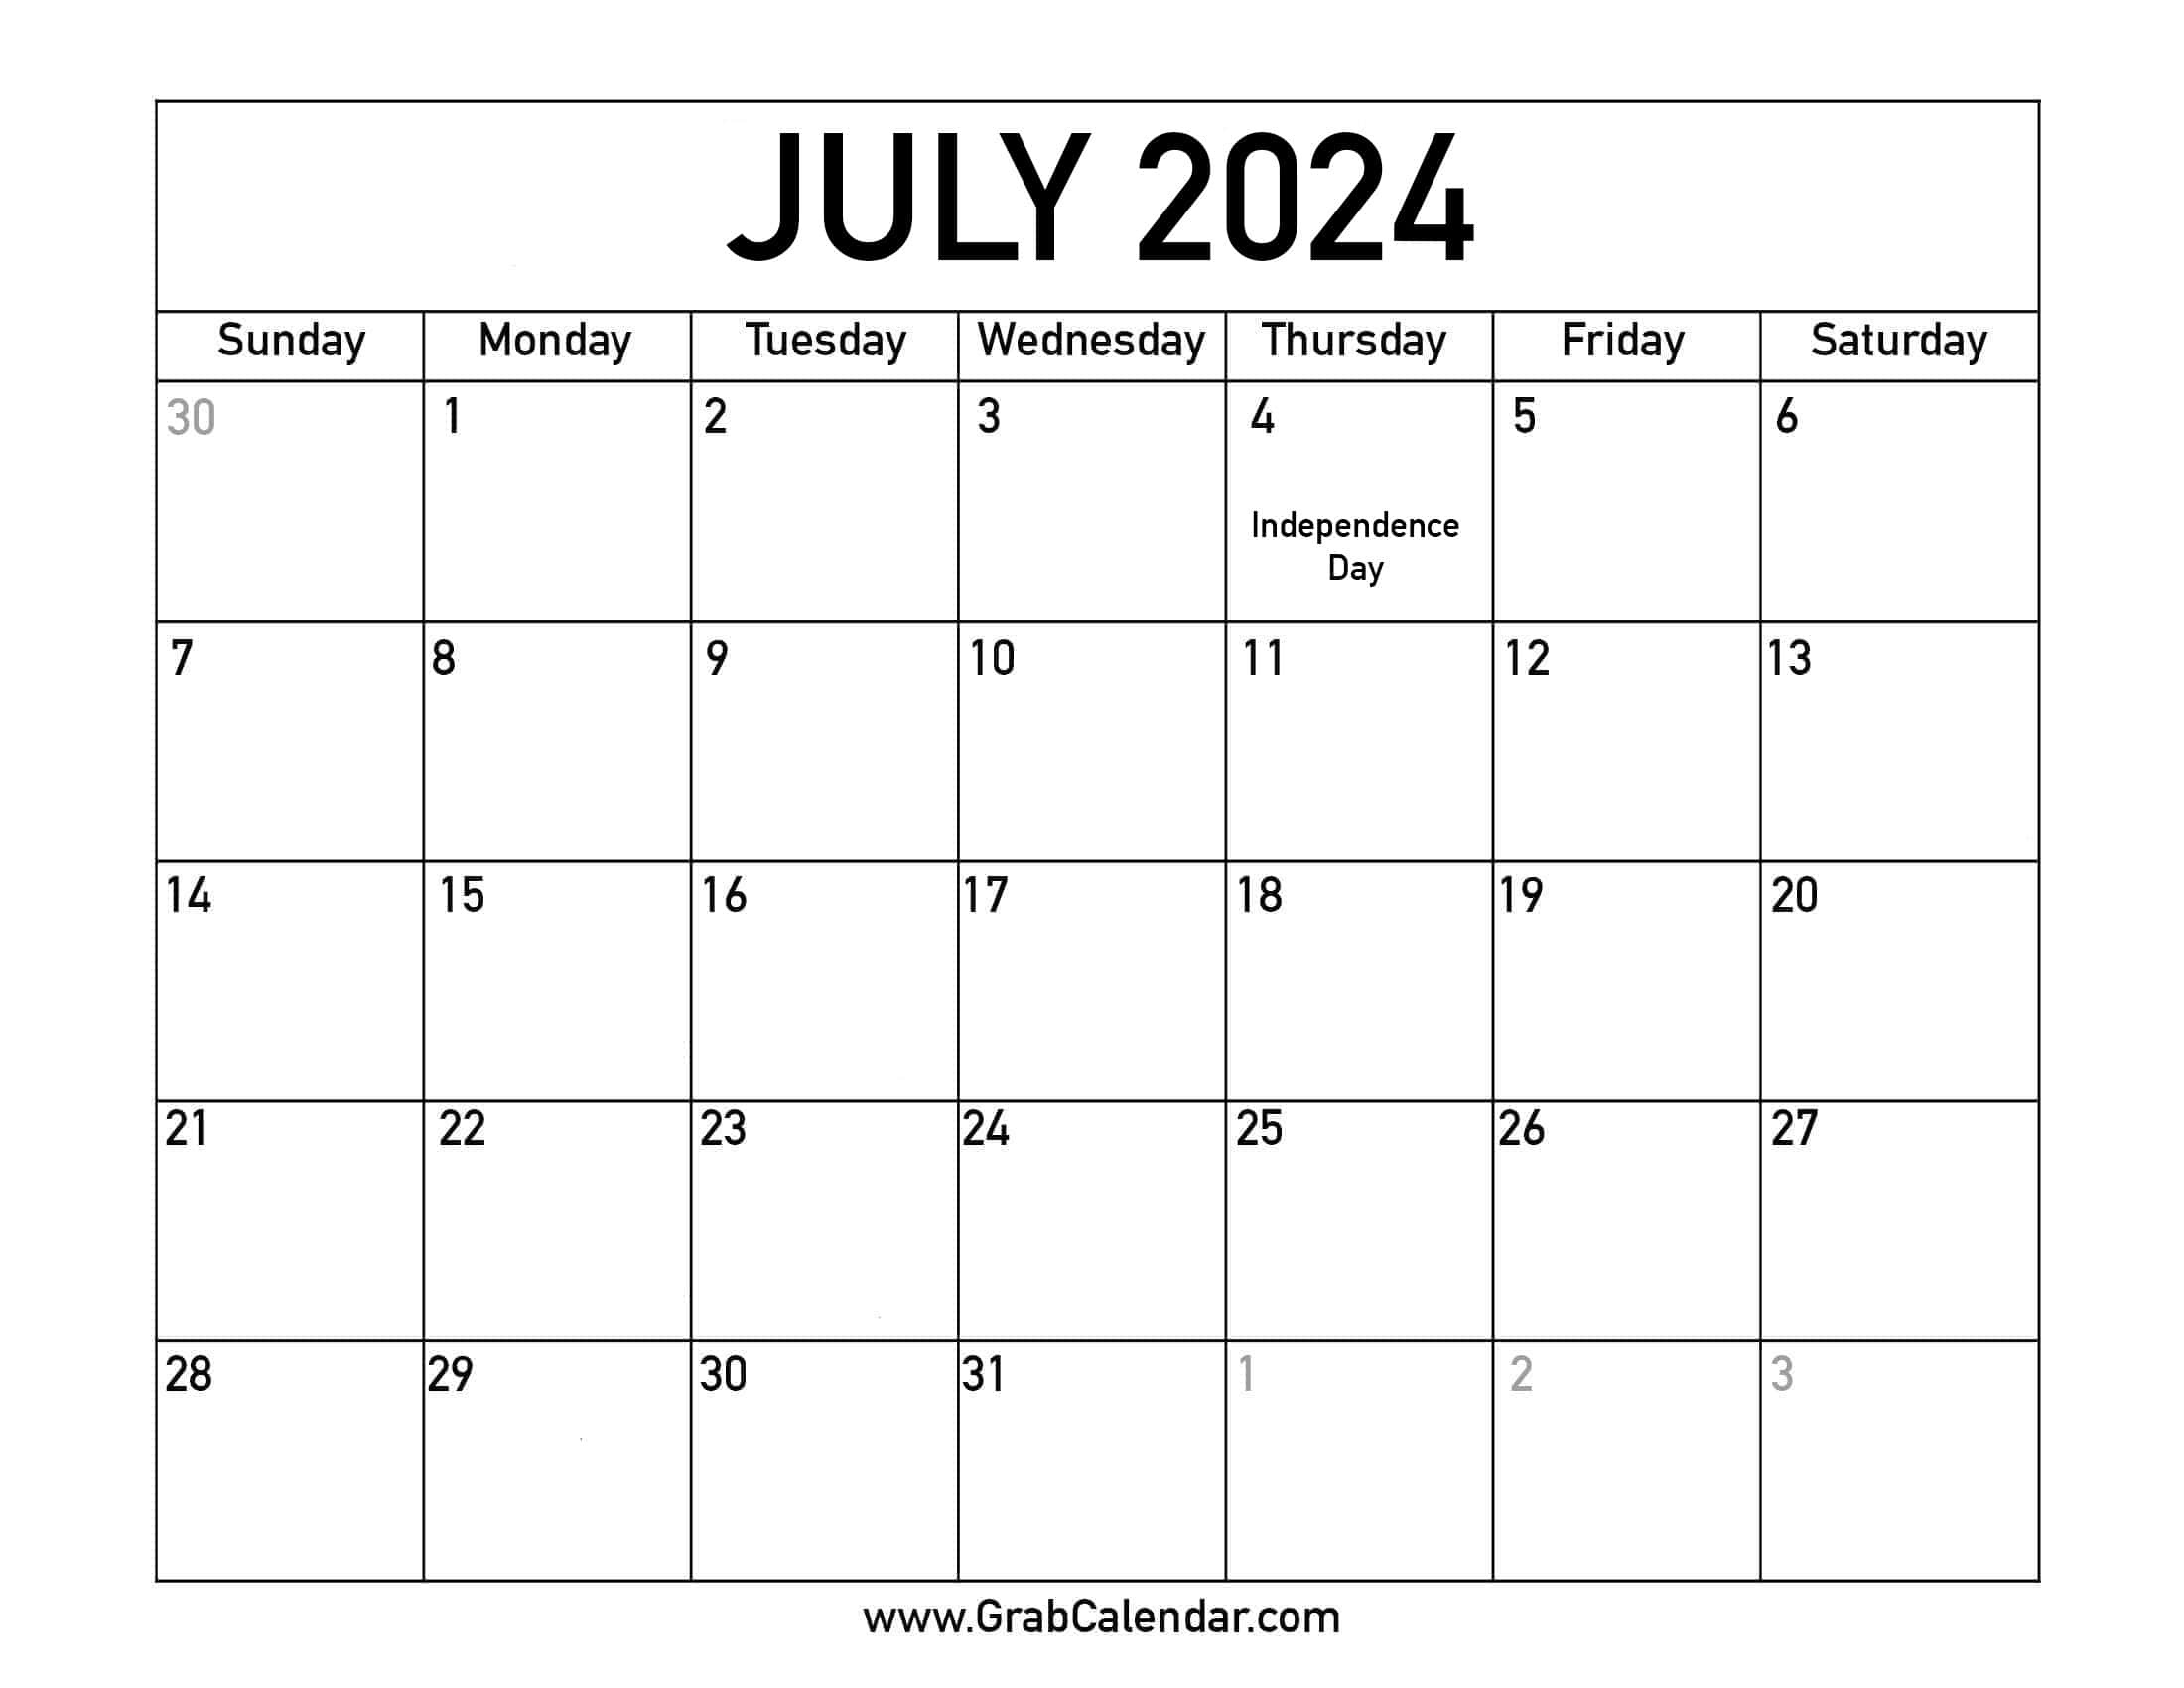 Printable July 2024 Calendar intended for July Fun Holiday Calendar 2024